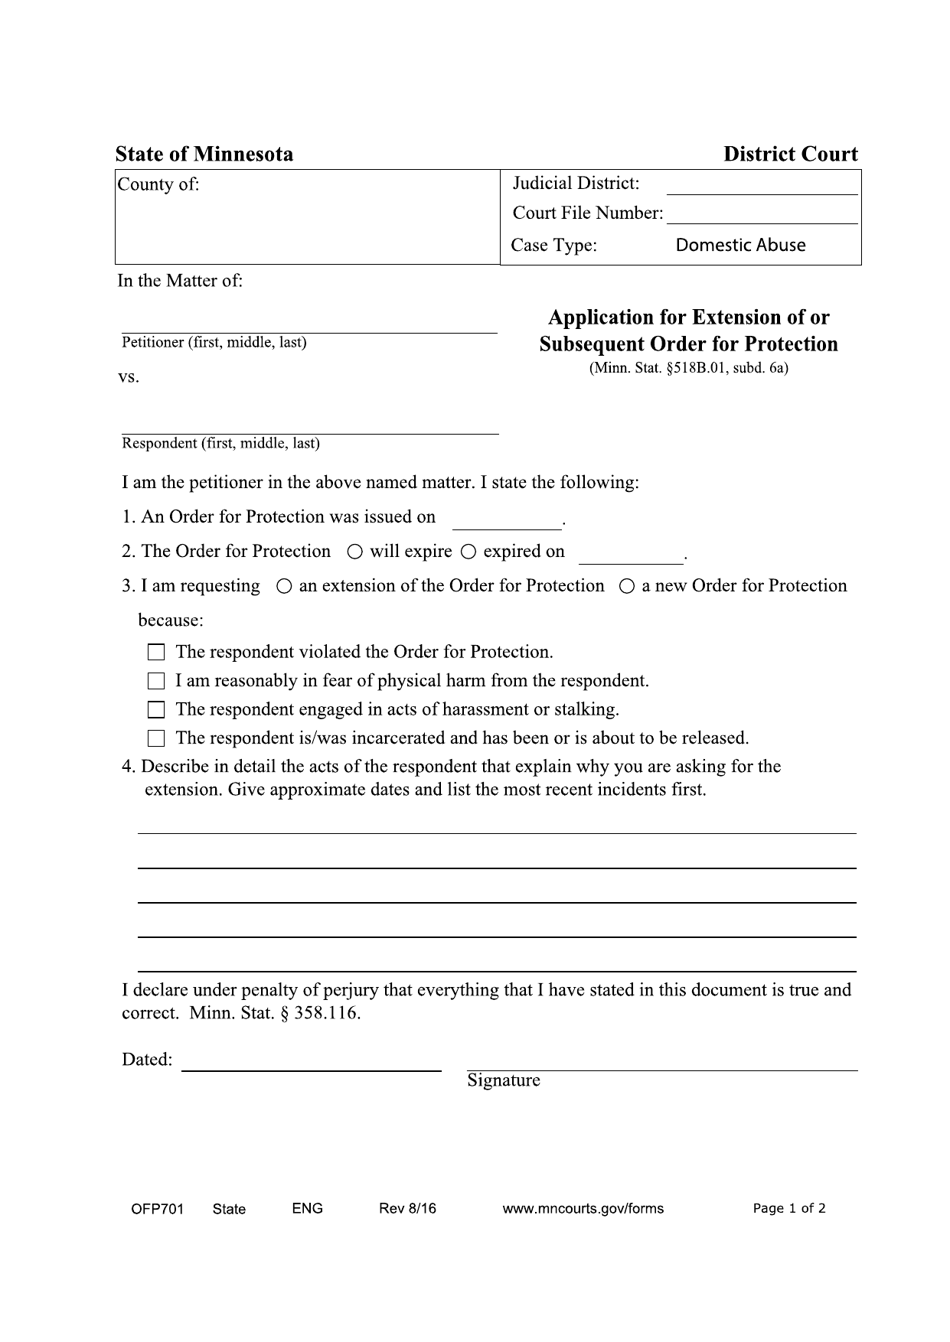 Form OFP701 Application for Extension of or Subsequent Order for Protection - Minnesota, Page 1